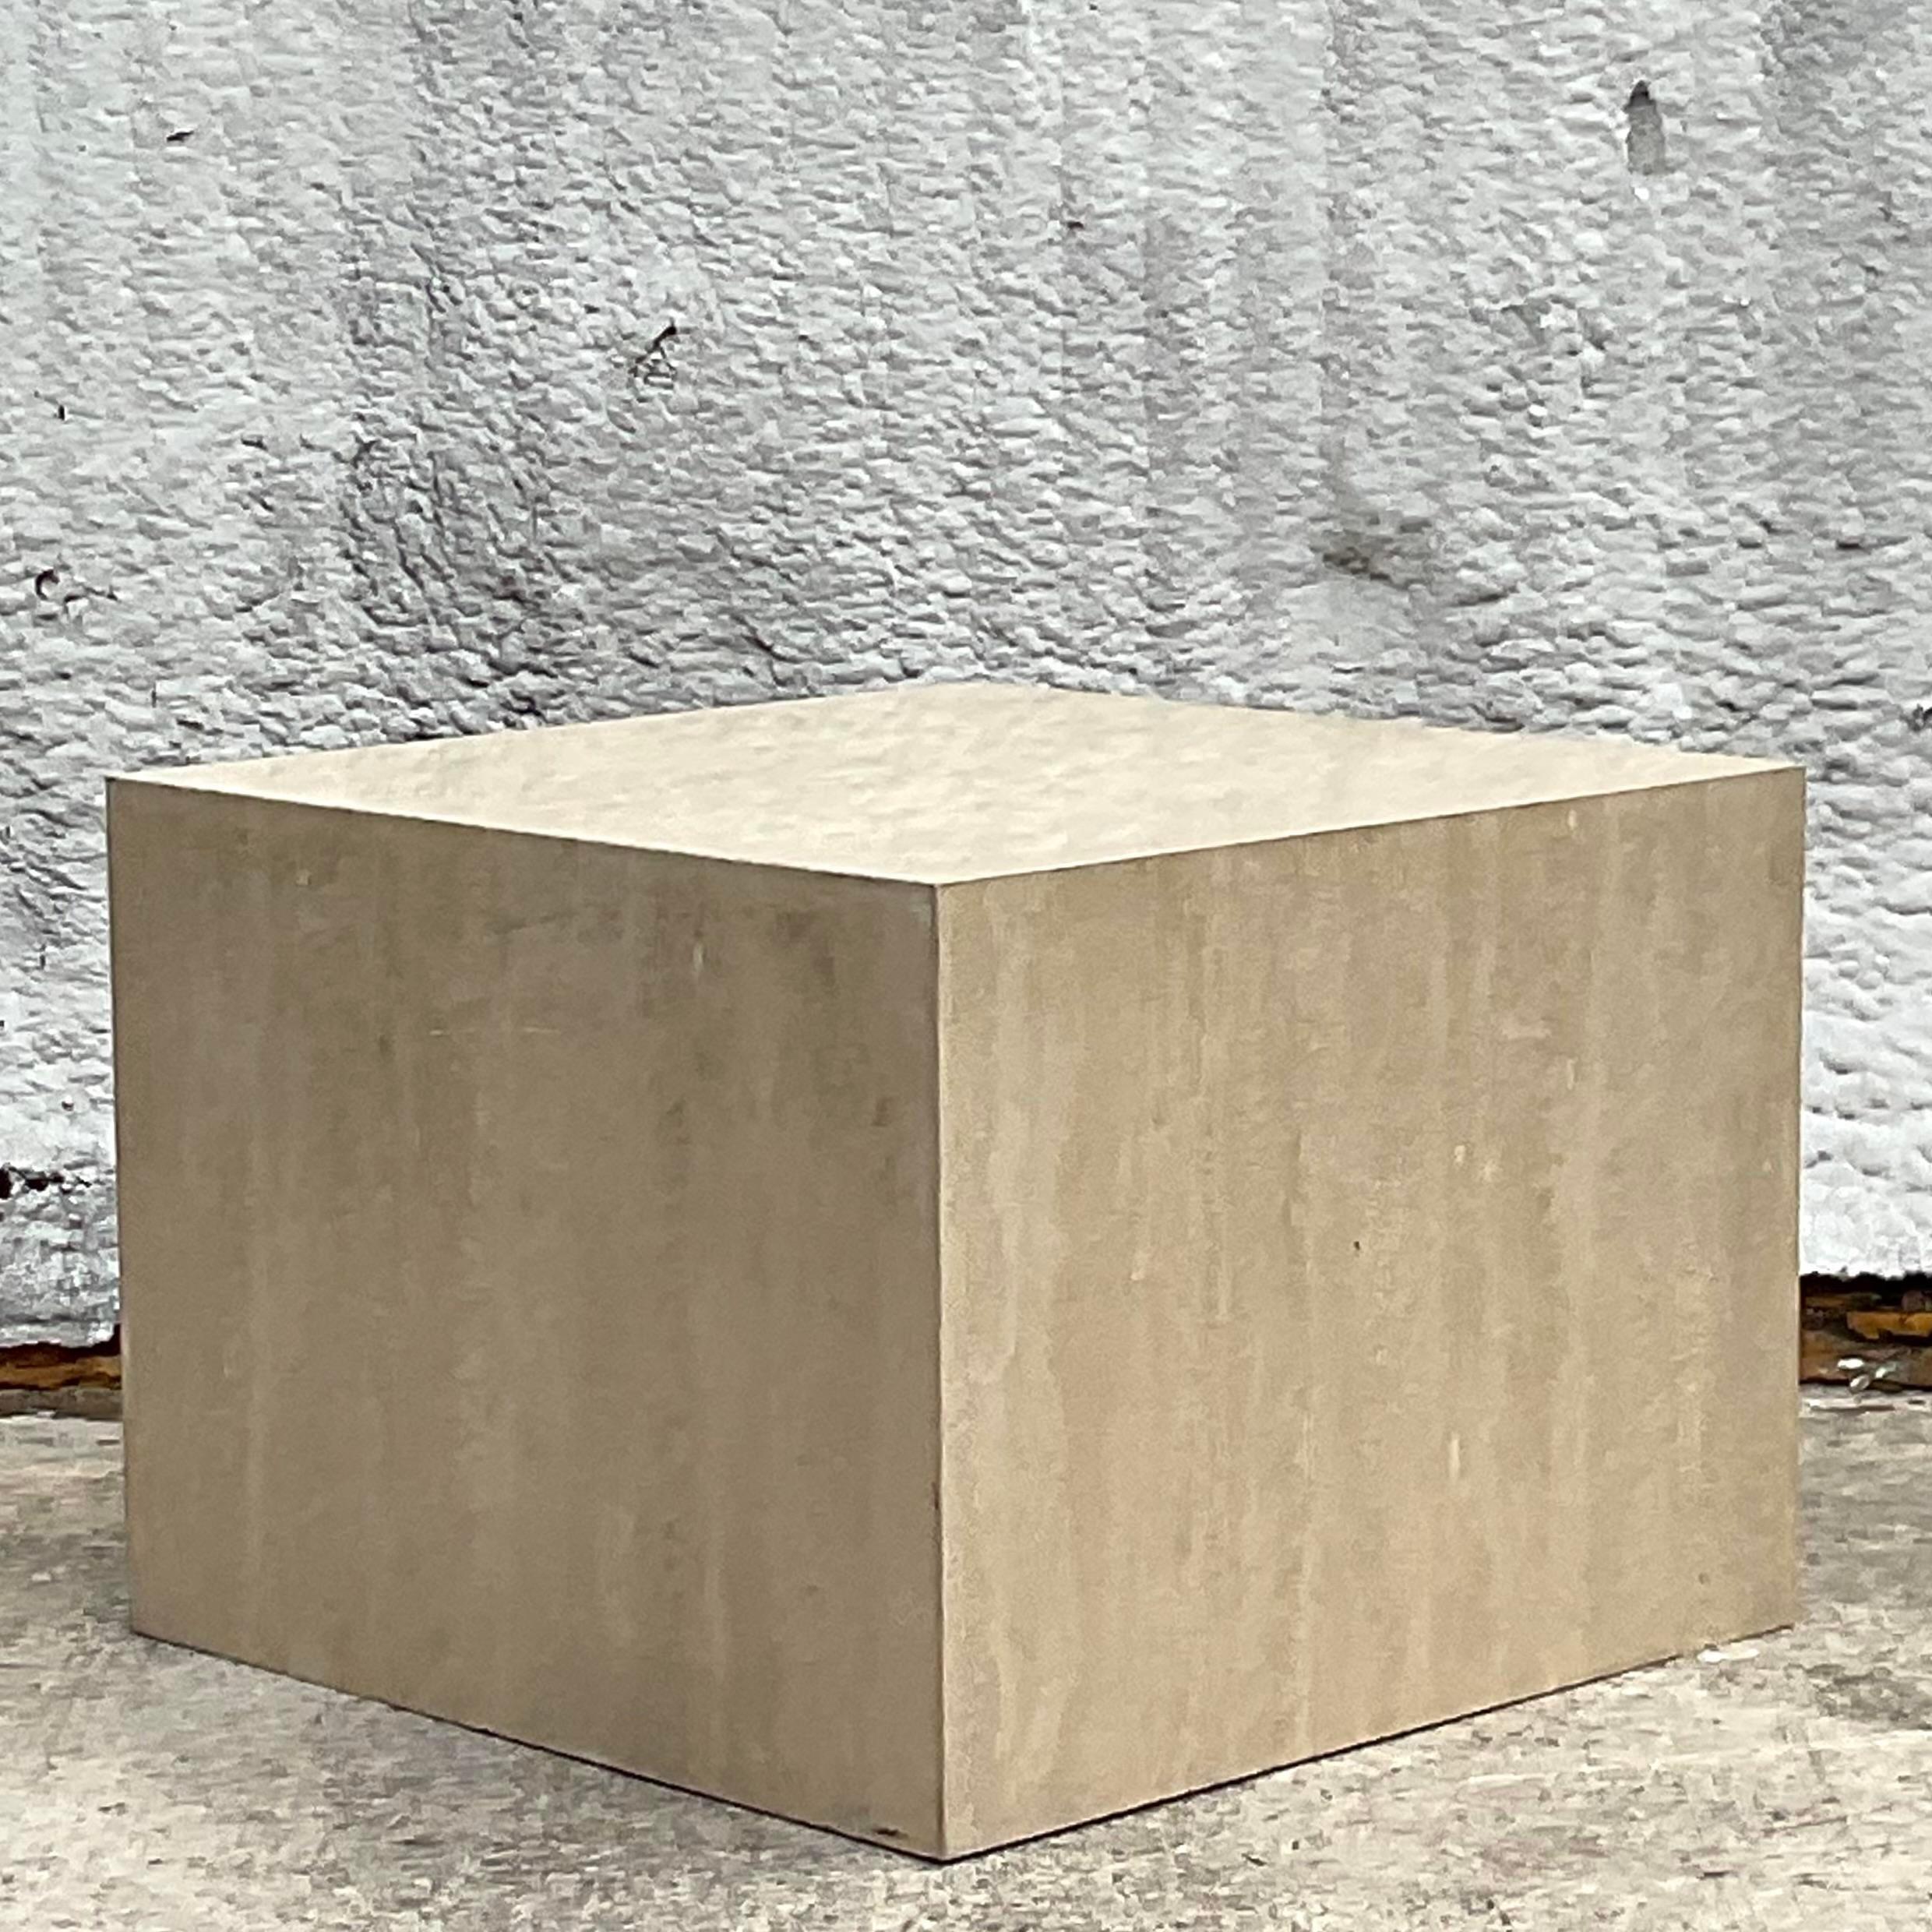 A fantastic vintage Contemporary side table. A chic travertine stone cube. Perfect as a side table even a chic entry hall or coffee table. You decide! Acquired from a Palm Beach estate.